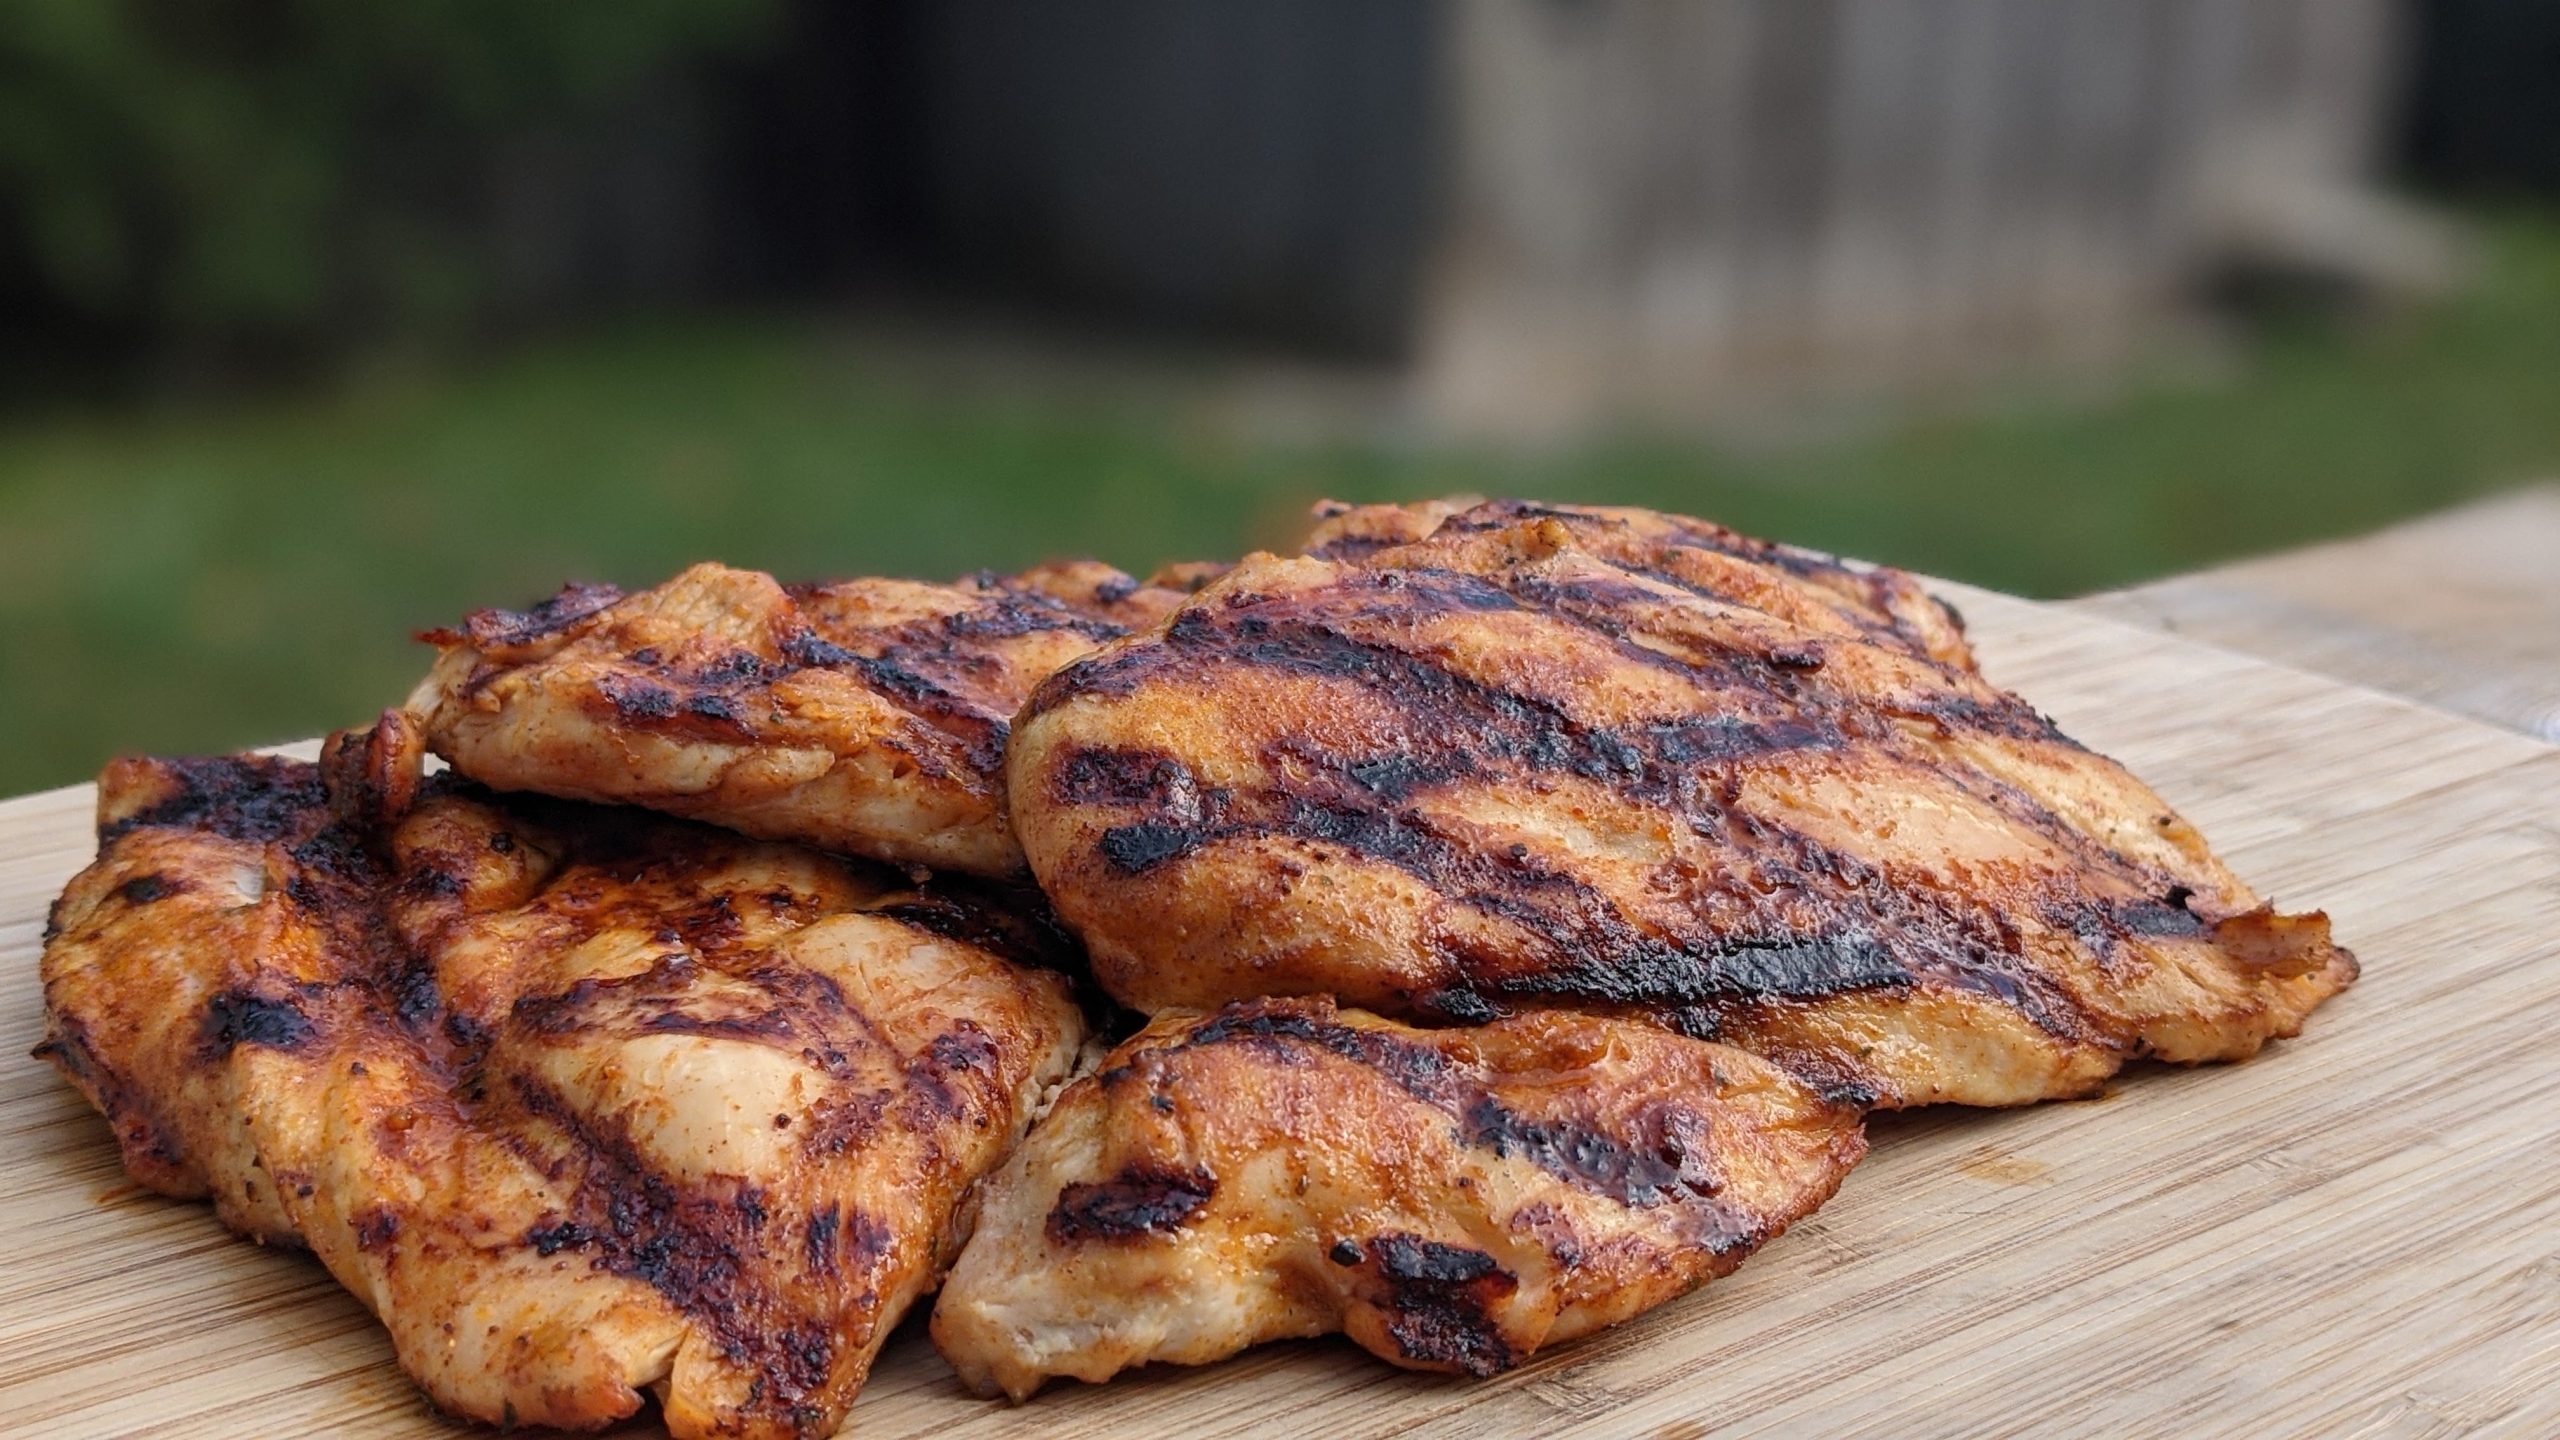 Grilled-Chicken-Tacos-made-with-Nutrafarms-pasture-raised-chicken-image-2.jpg